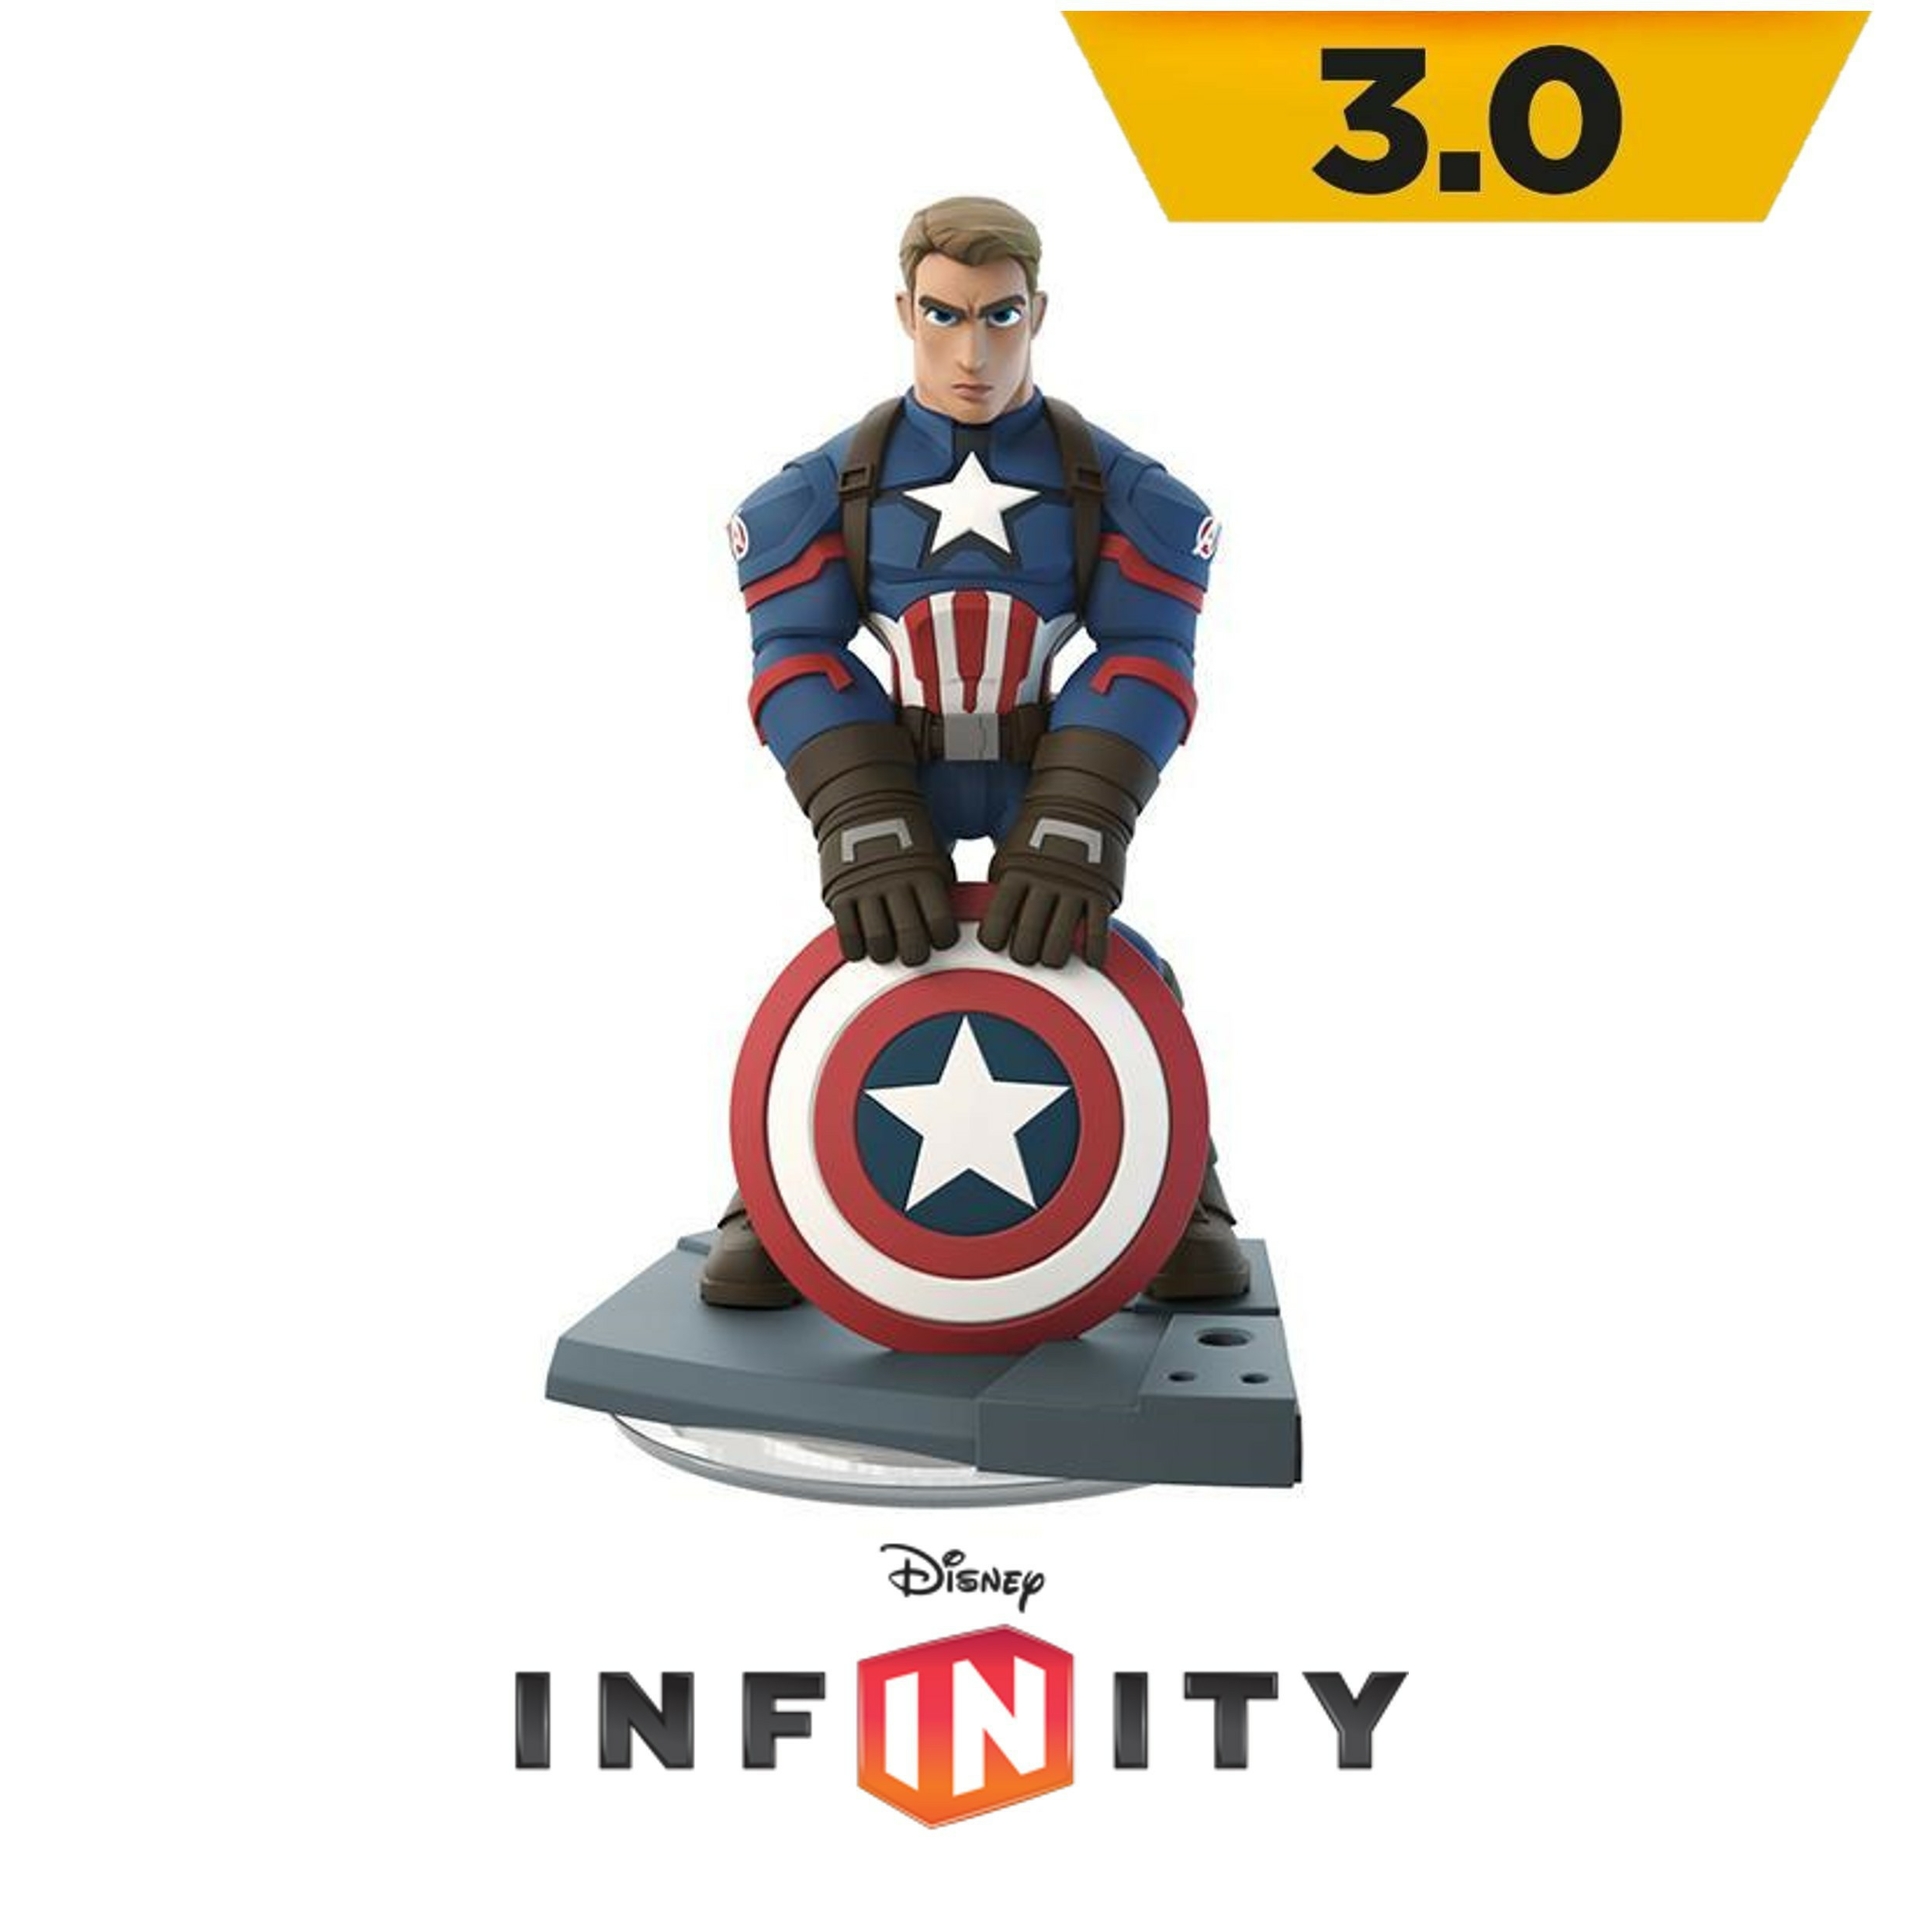 Disney Infinity - Captain America The First Avenger - Playstation 3 Hardware